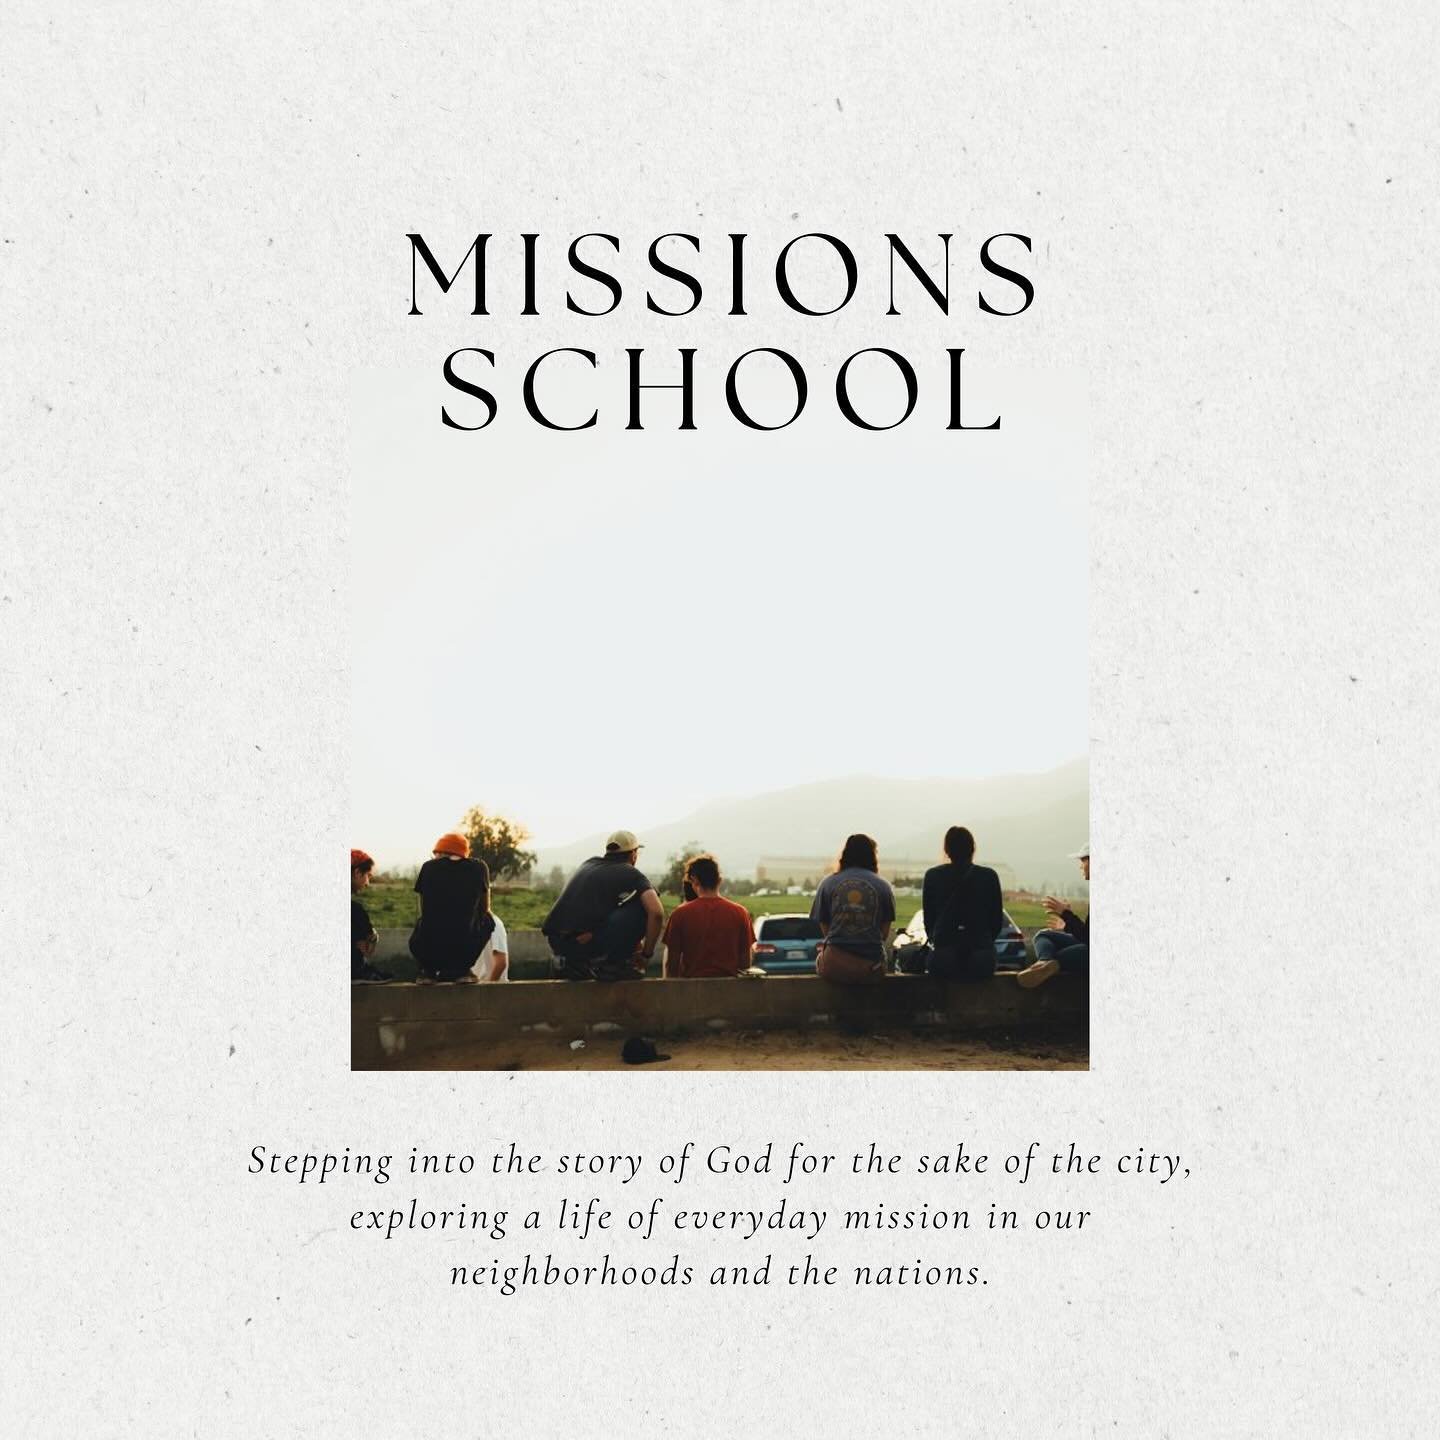 🌎 Youth Summer Missions School 🌎

God is calling a generation of young people to embrace His invitation to go into all the earth and proclaim His gospel! Here at Dwelling Place we are learning how to embrace that call.

Join us this summer as we ex